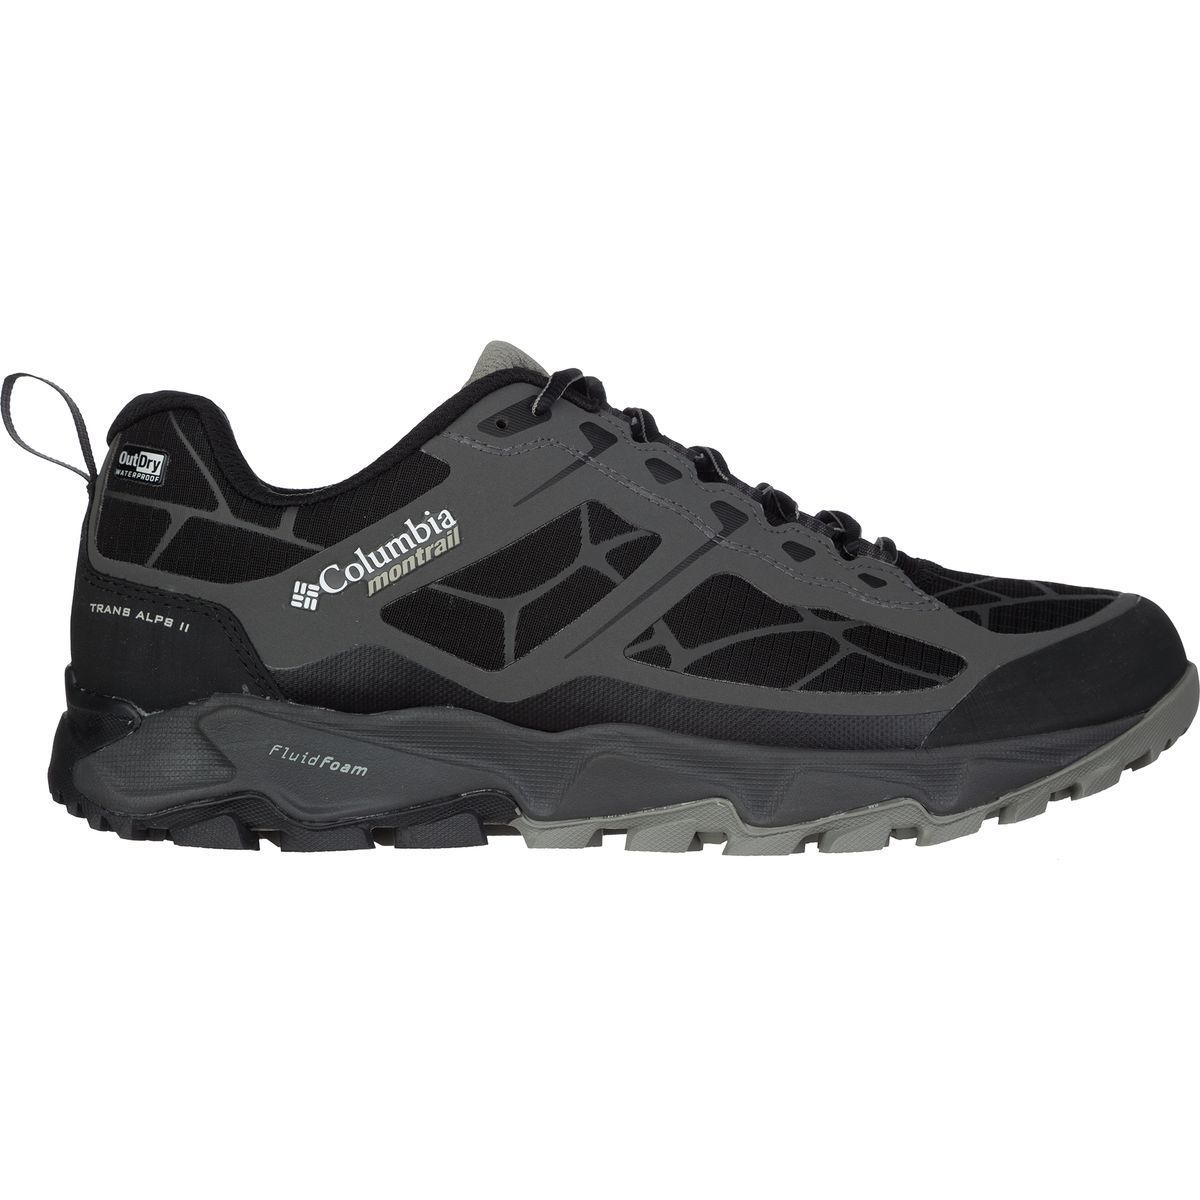 Montrail Trans Alps II Outdry Trail Running Shoe Mens